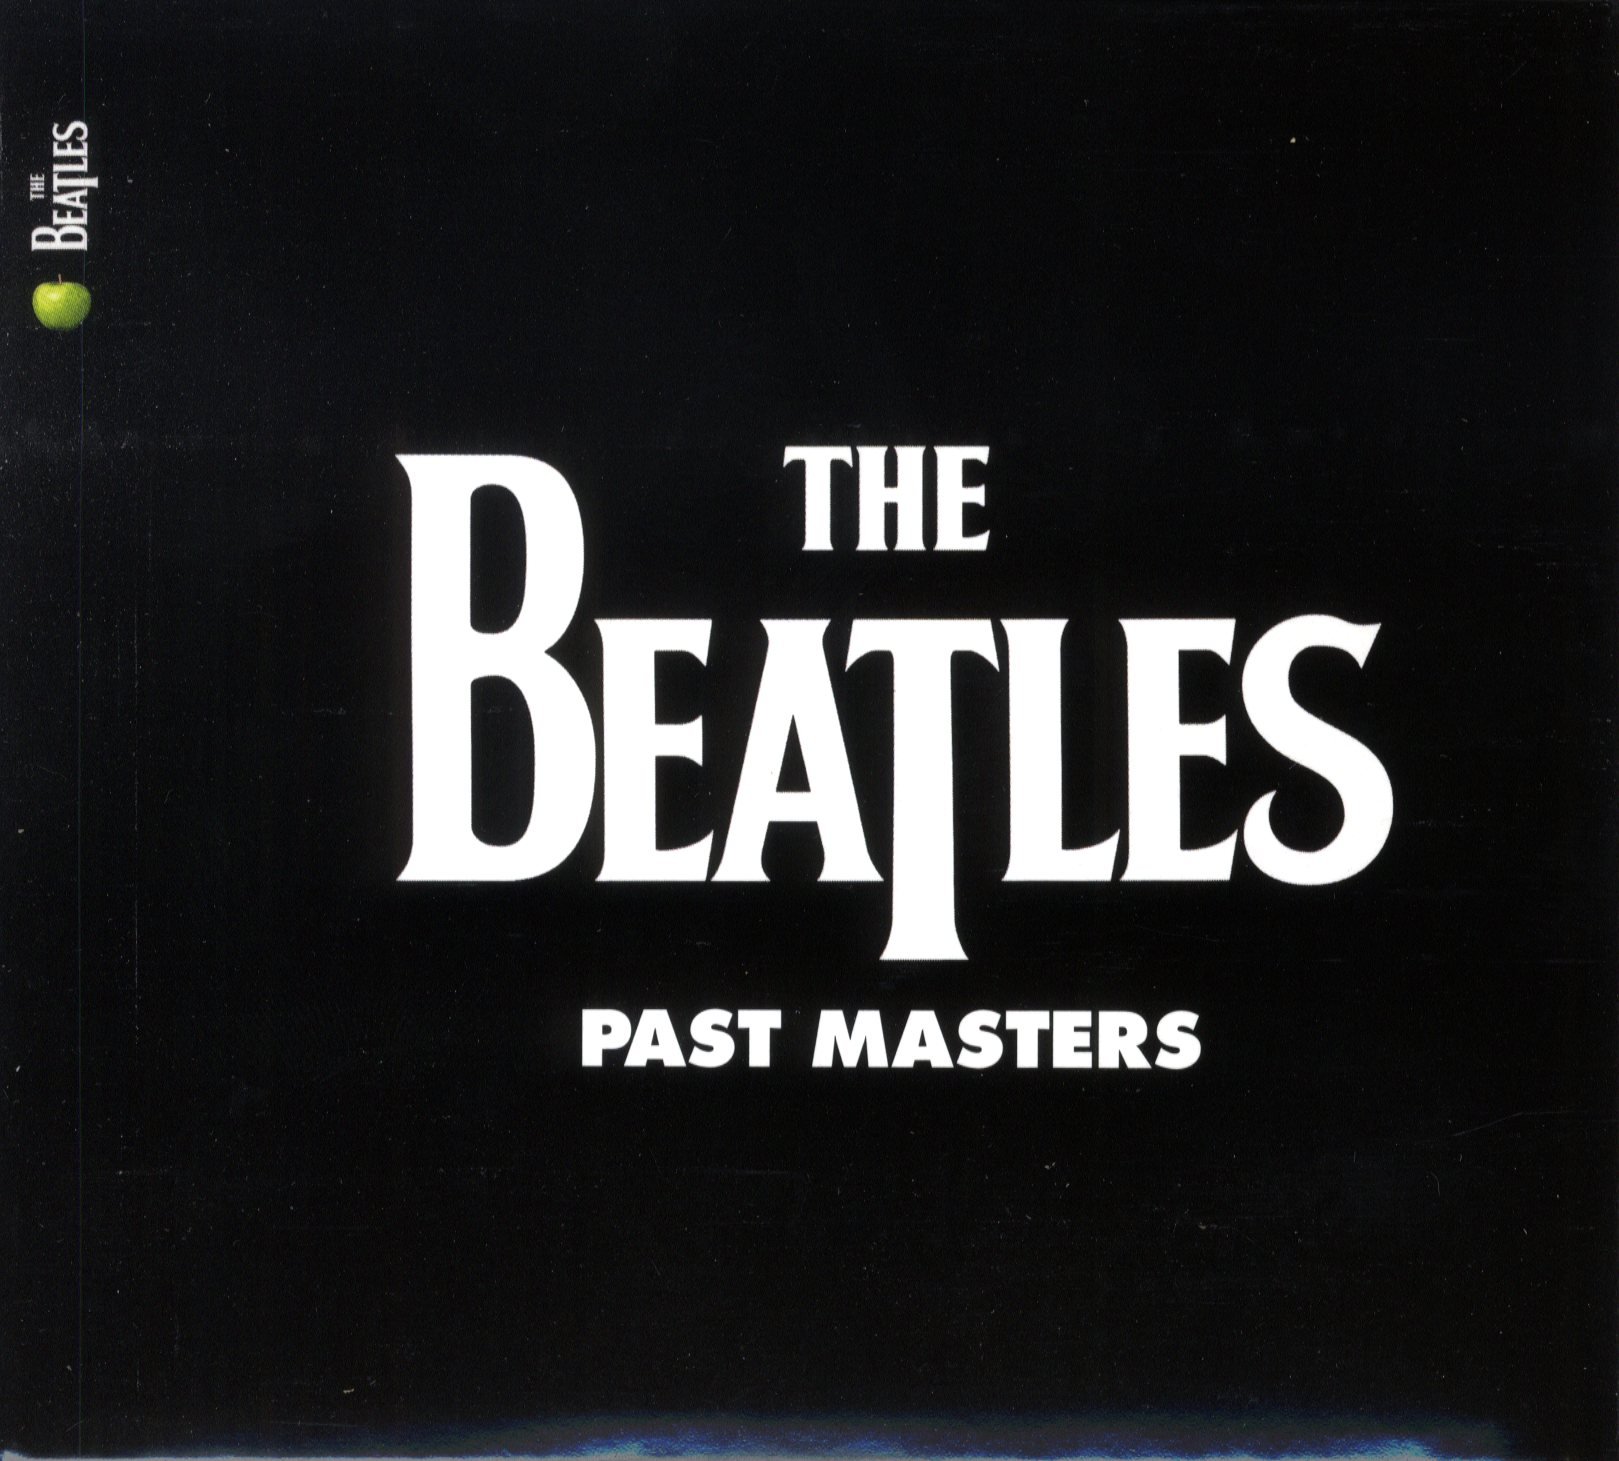 The Beatles-Past Masters-(5099969943515)-REISSUE REMASTERED-2LP-FLAC-2018-WRE Download